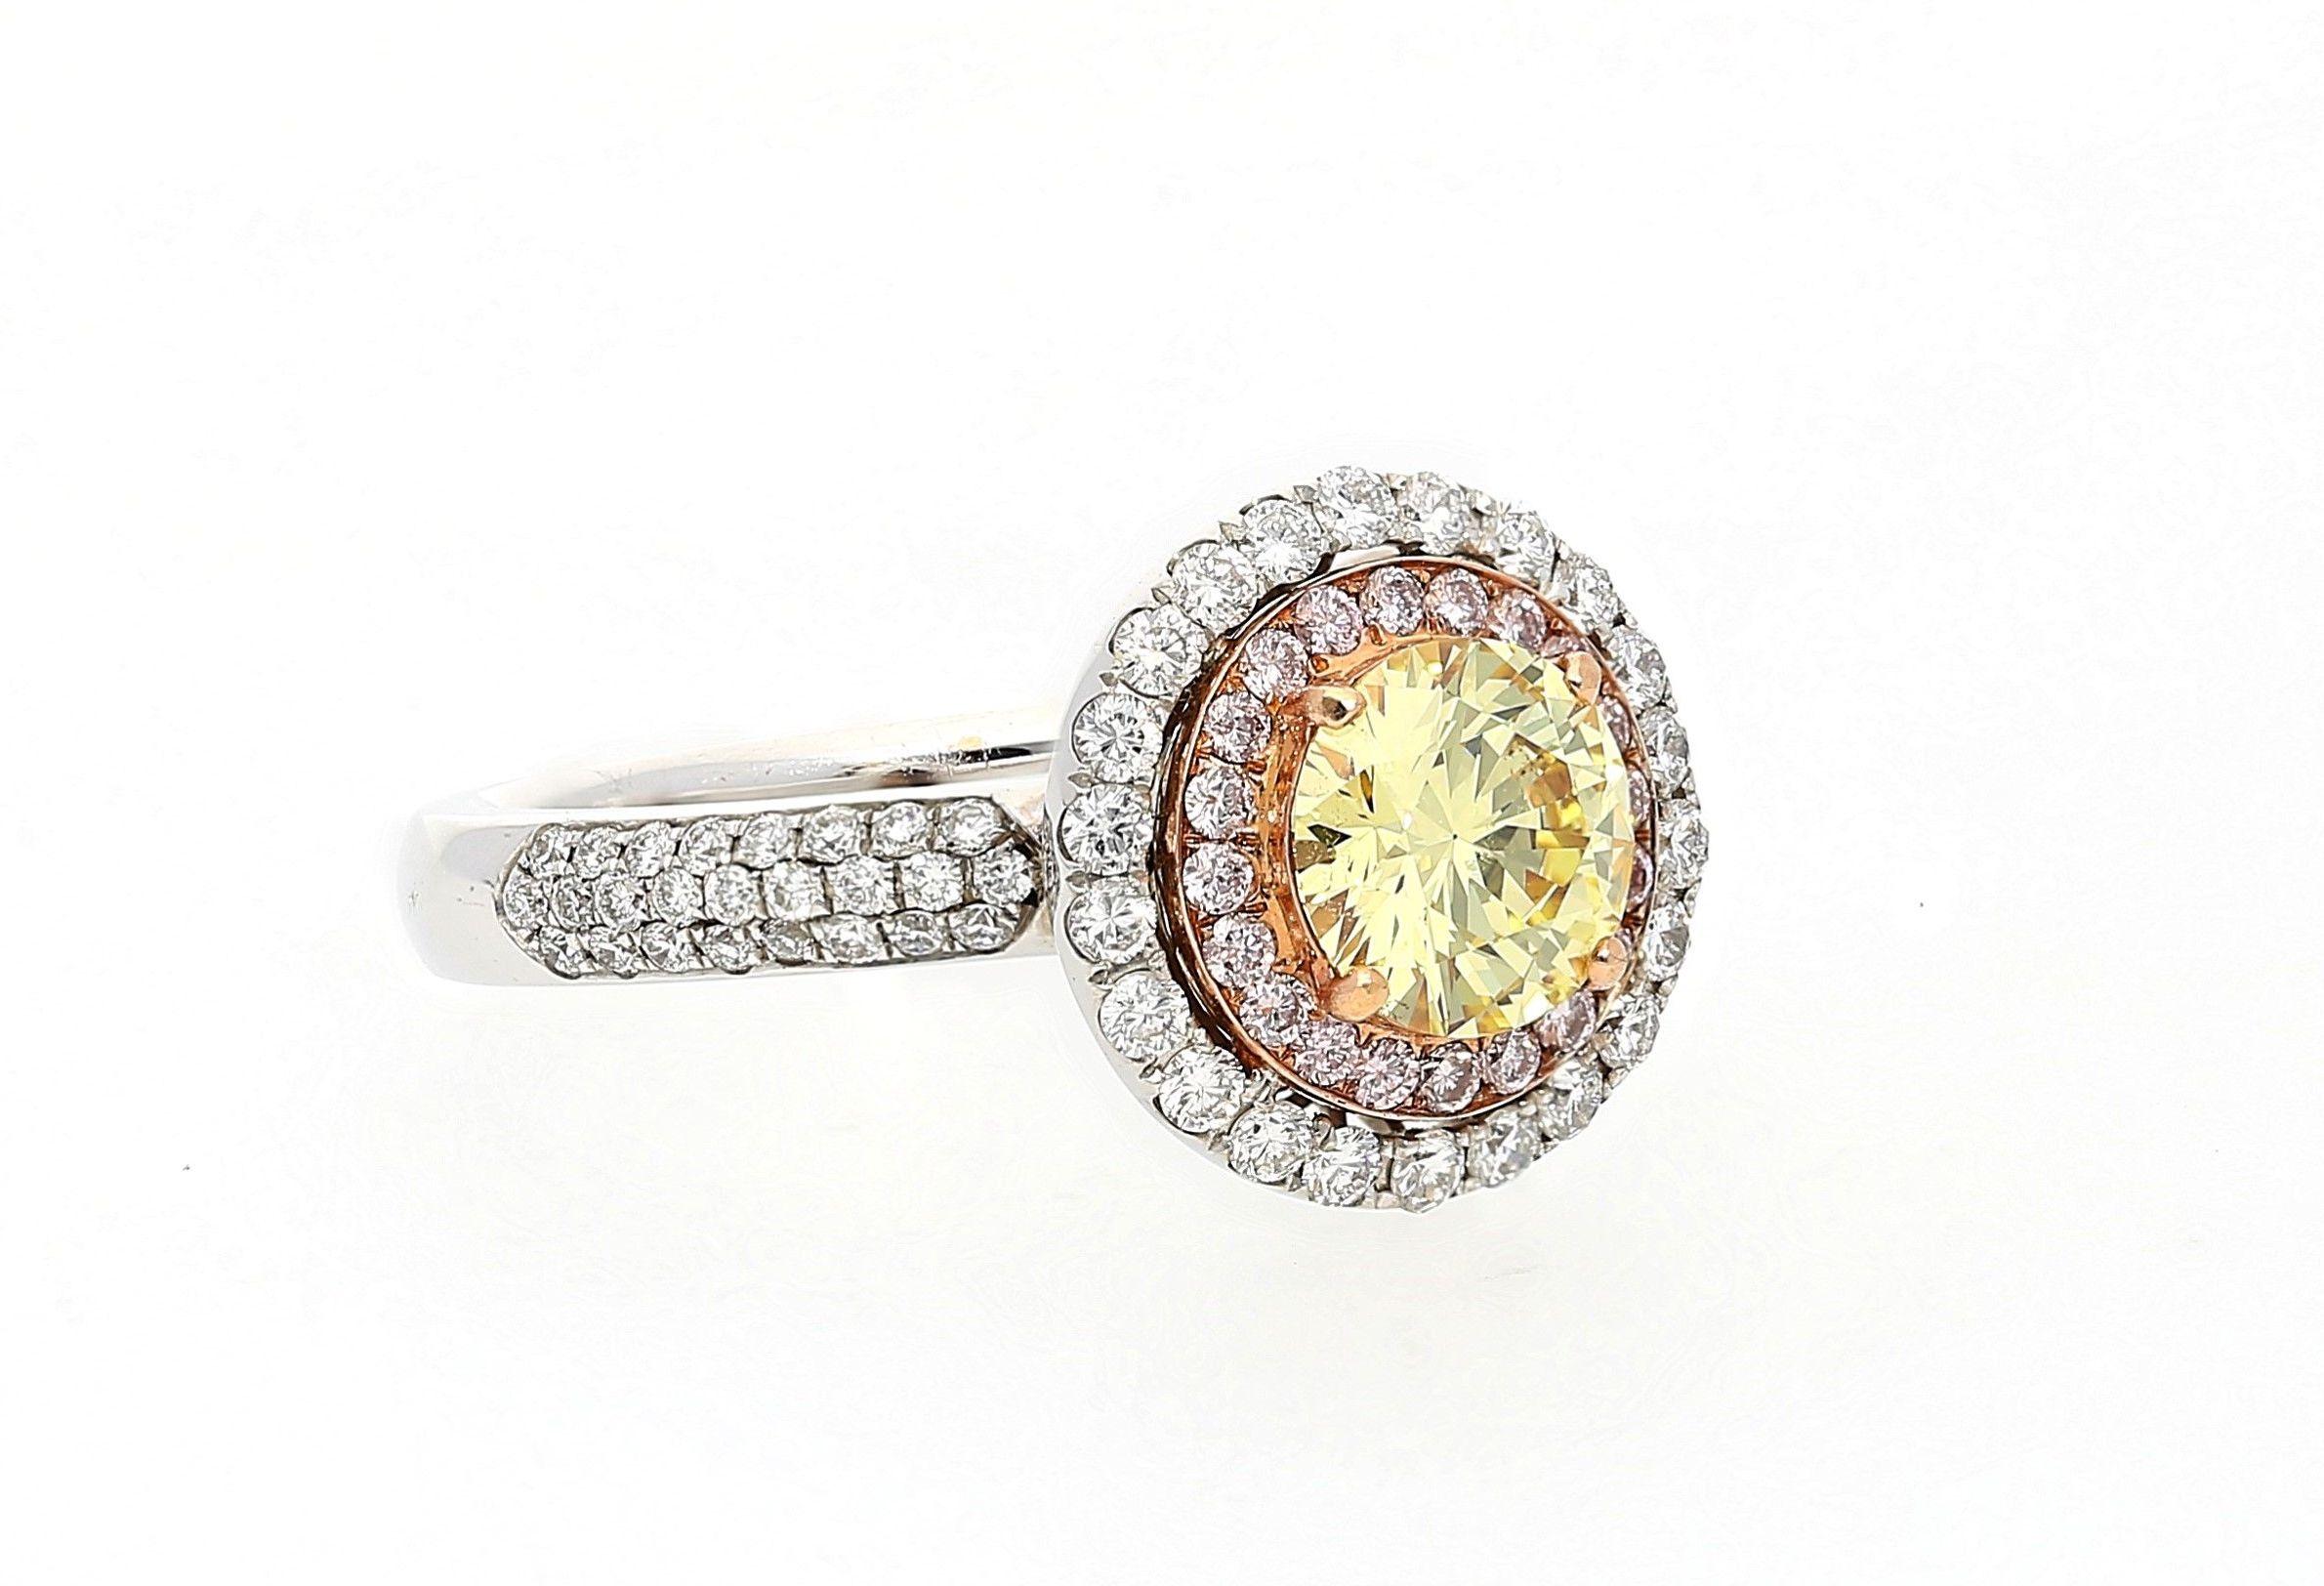 Centering a 1.01 Carat Round-Brilliant Cut Fancy Yellow Diamond of VS2 Clarity, accented by 0.68 Carats of Pink and White Round-Brilliant Cut Diamonds, and set in 18K White/Rose Gold, this gem marries three of the most prominent natural diamond